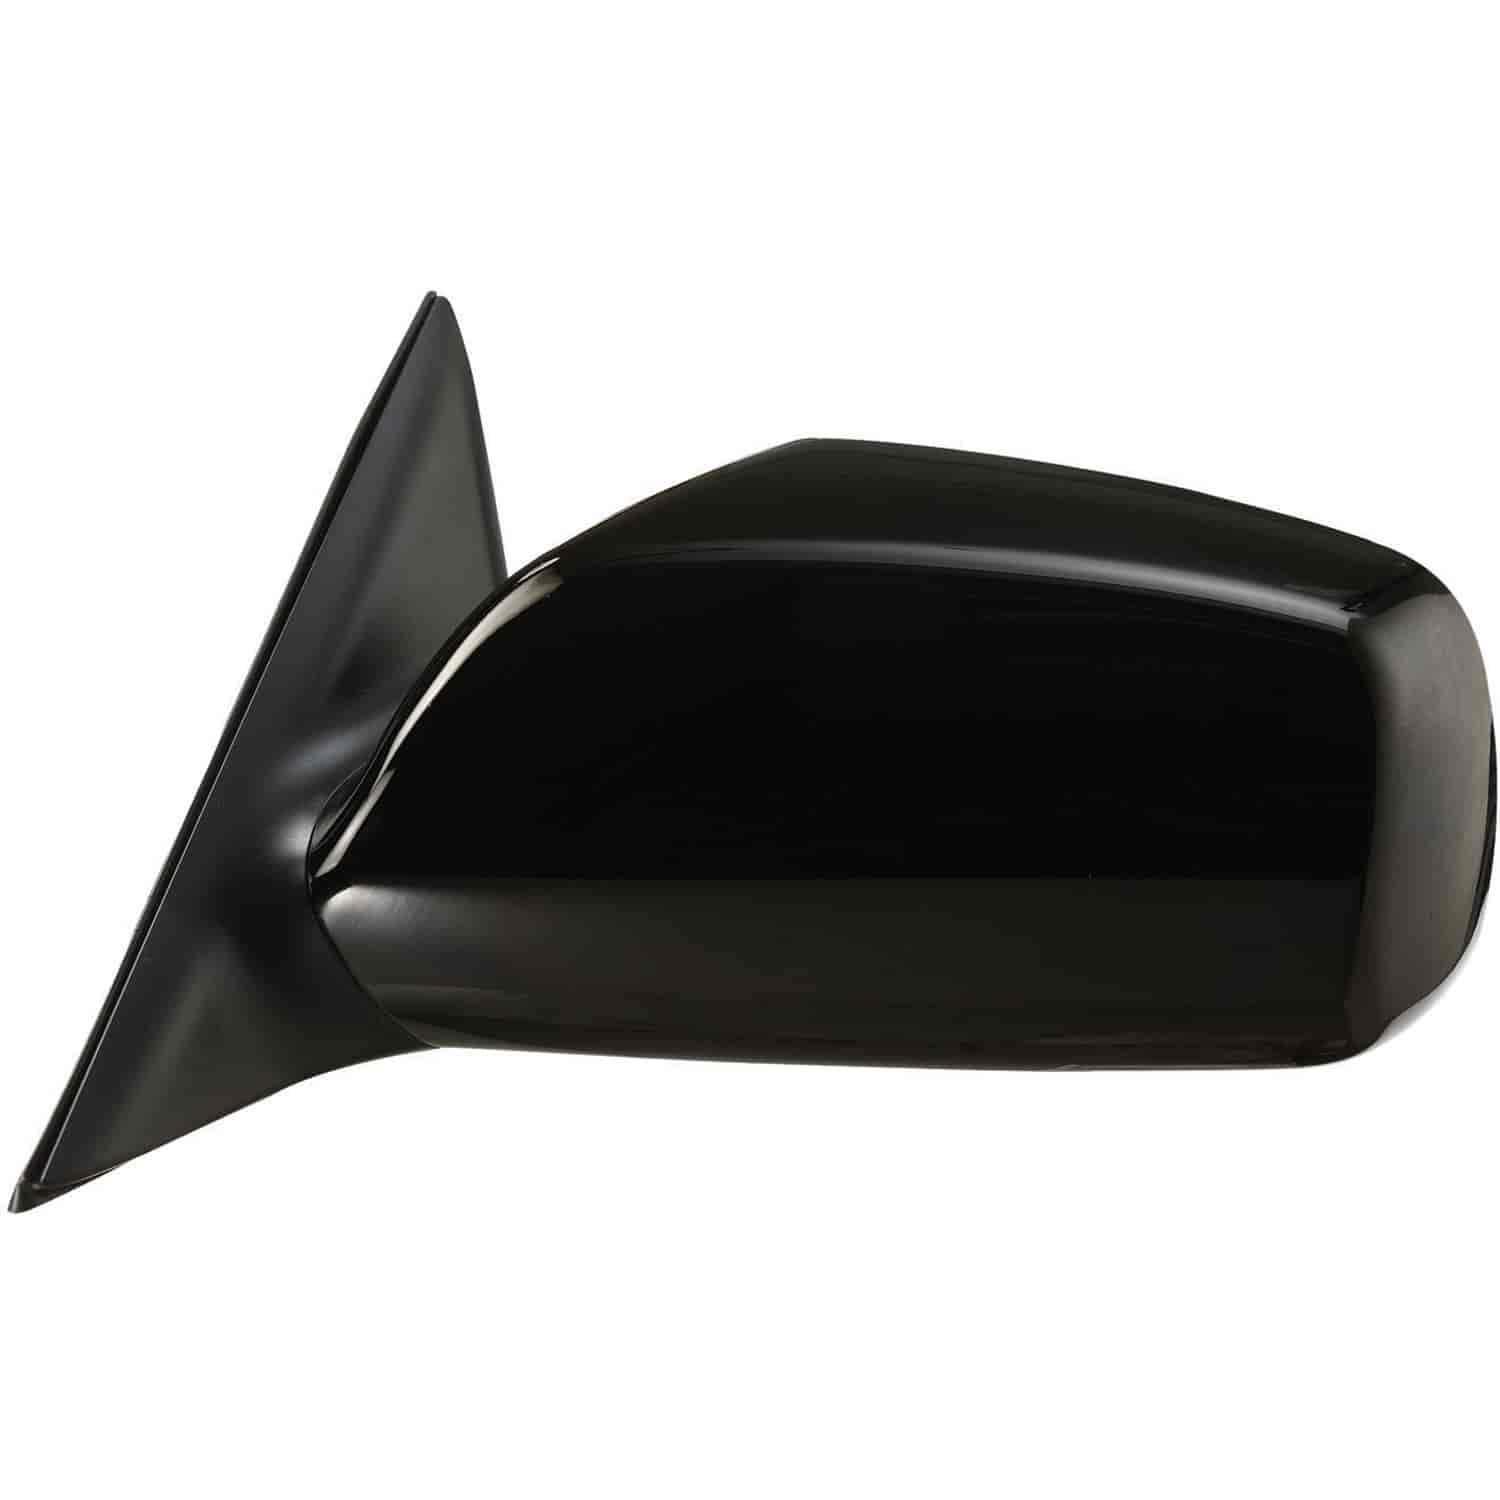 OEM Style Replacement mirror for 07-11 Toyota Camry US built; Toyota Camry Japan built includes Hybr